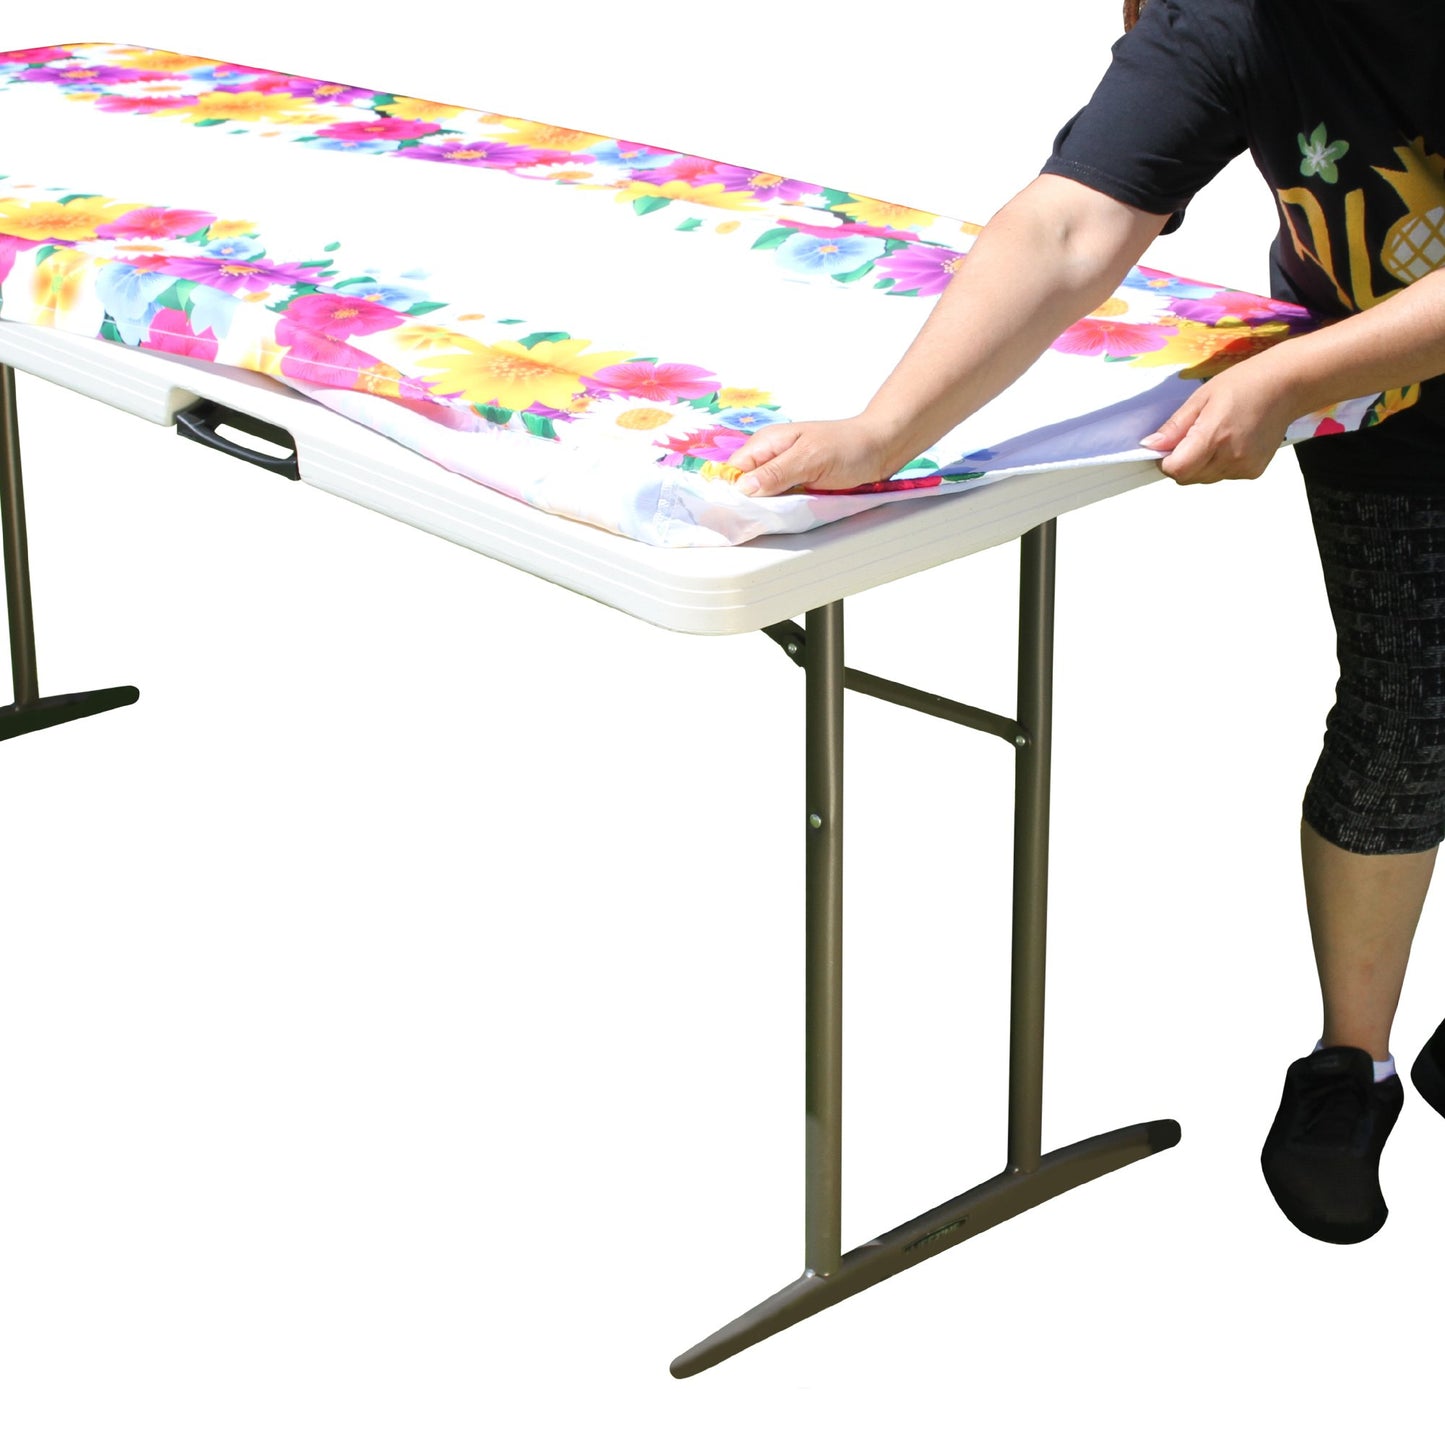 A person stretching TableCloth PLUS 72" Spring Fitted Polyester Tablecloth for 6' Folding Tables over a folding table